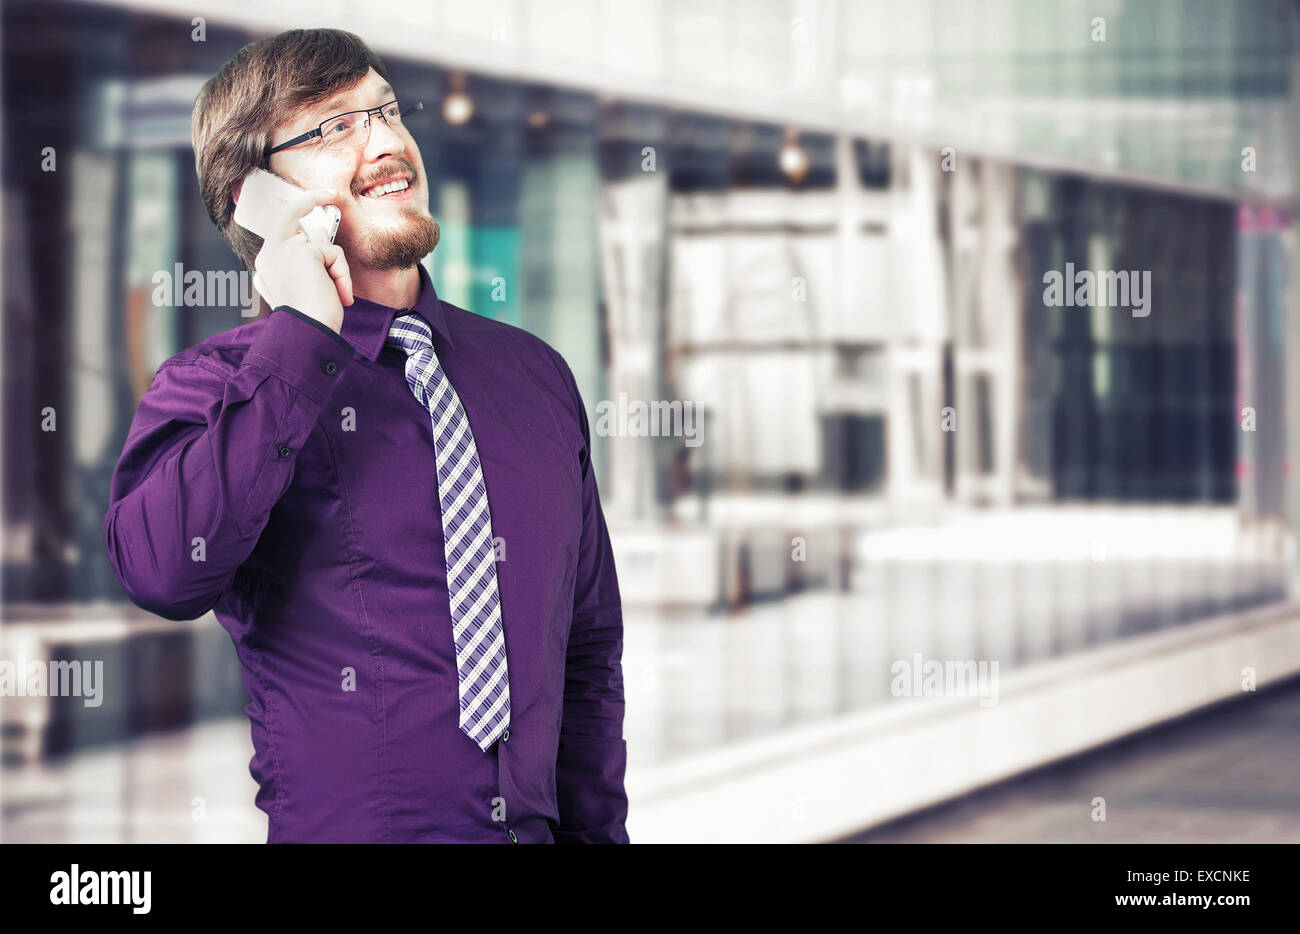 Portrait of a young businessman talking on the phone Banque D'Images